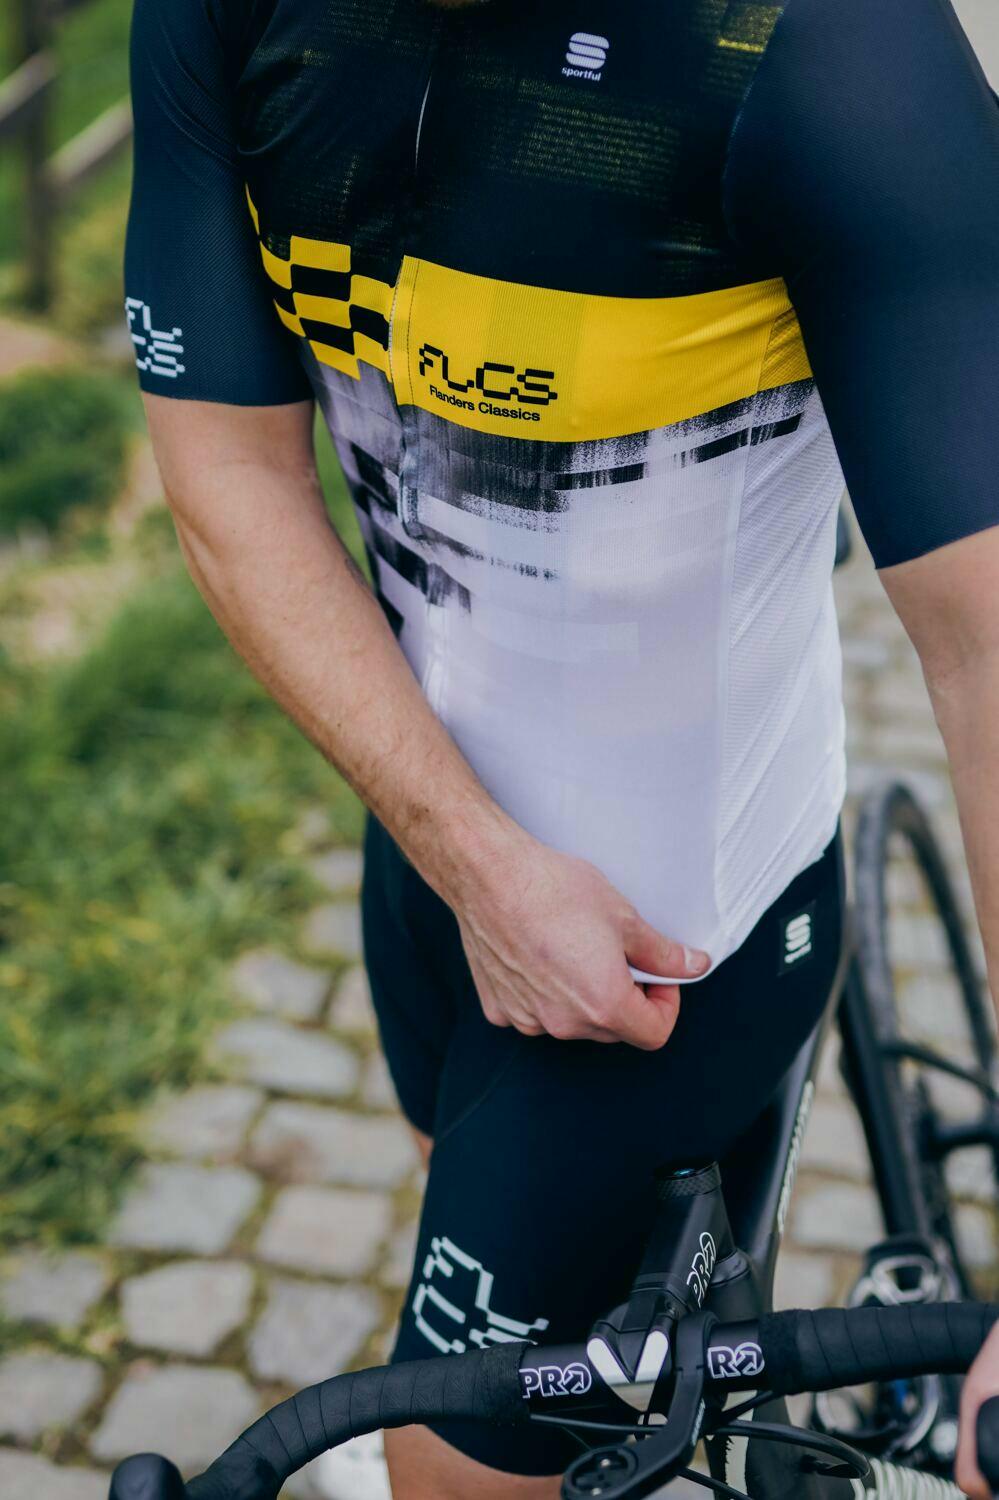 Sportful designs the new Flanders Classics collection